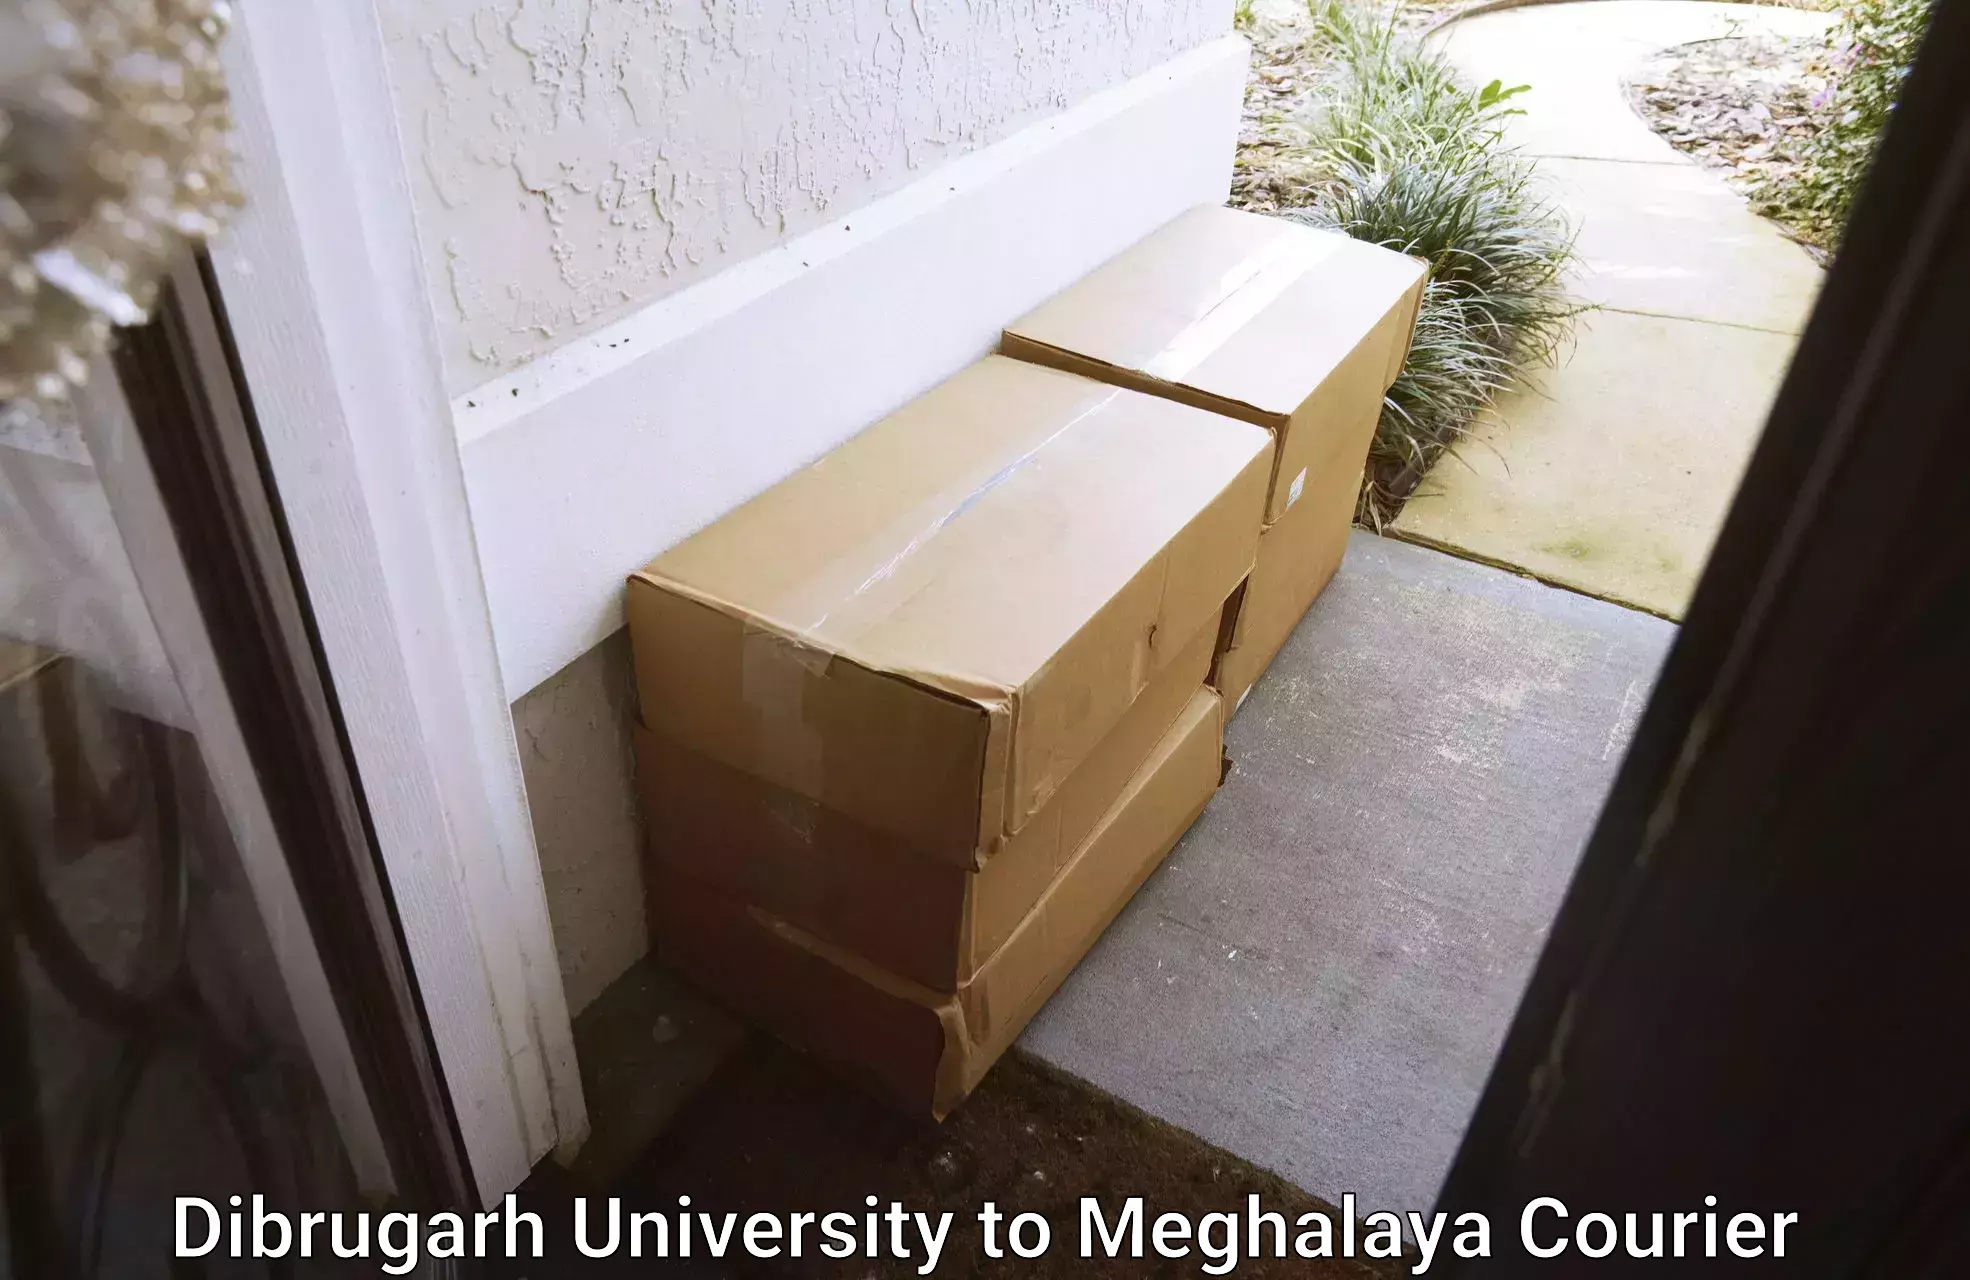 Residential courier service Dibrugarh University to Dkhiah West